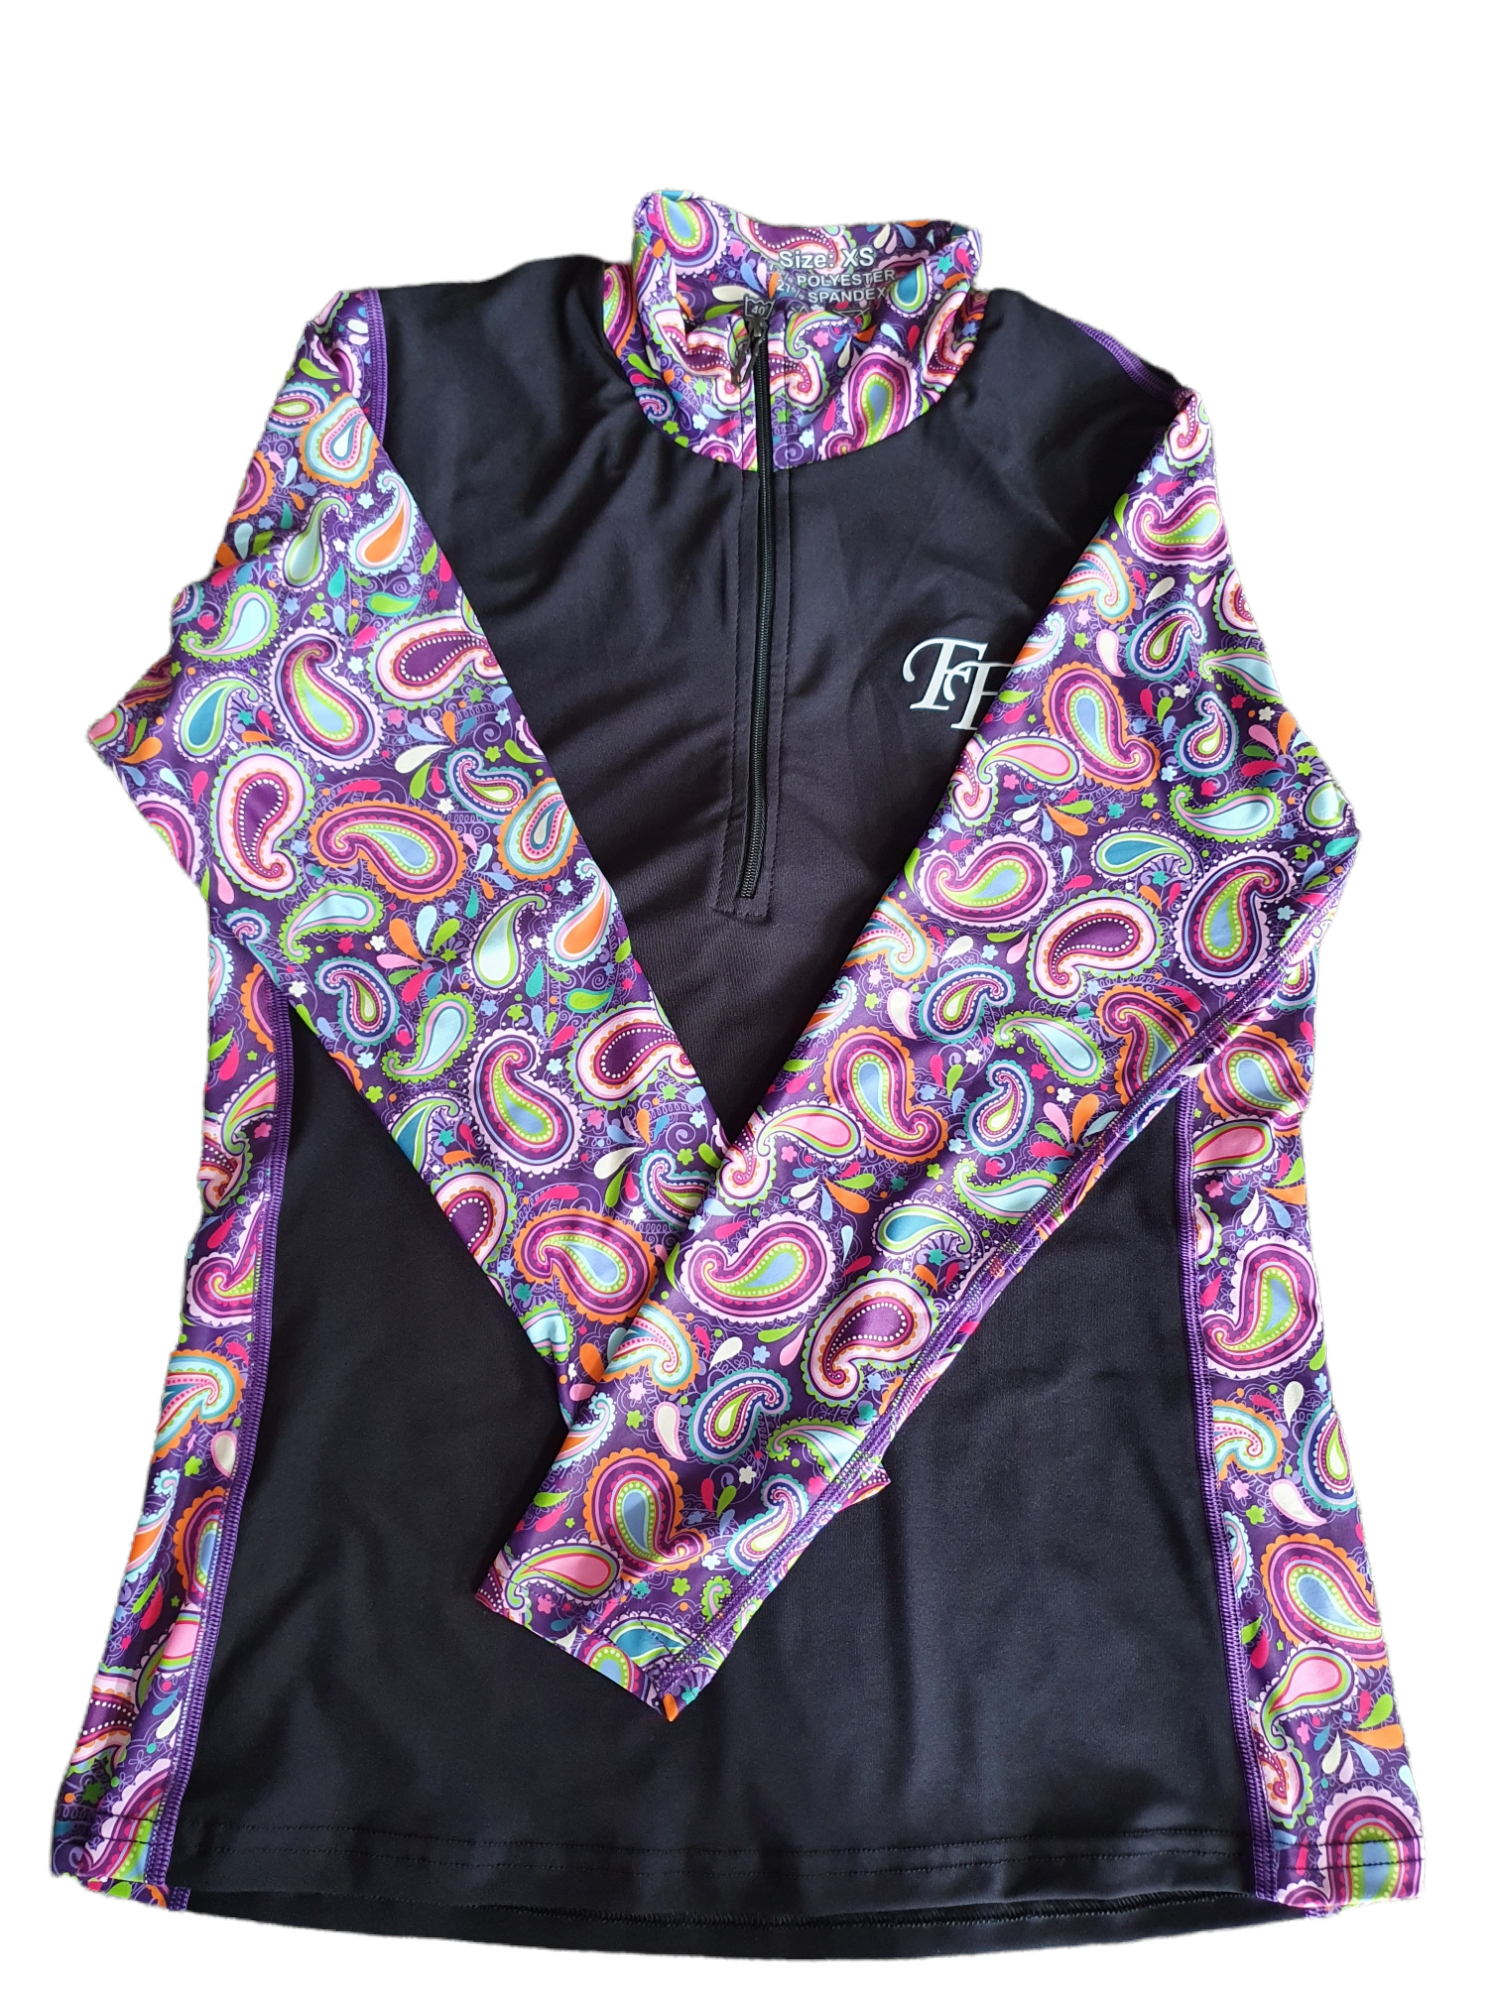 Funky Fit Equestrian - Paisley Passion Baselayer